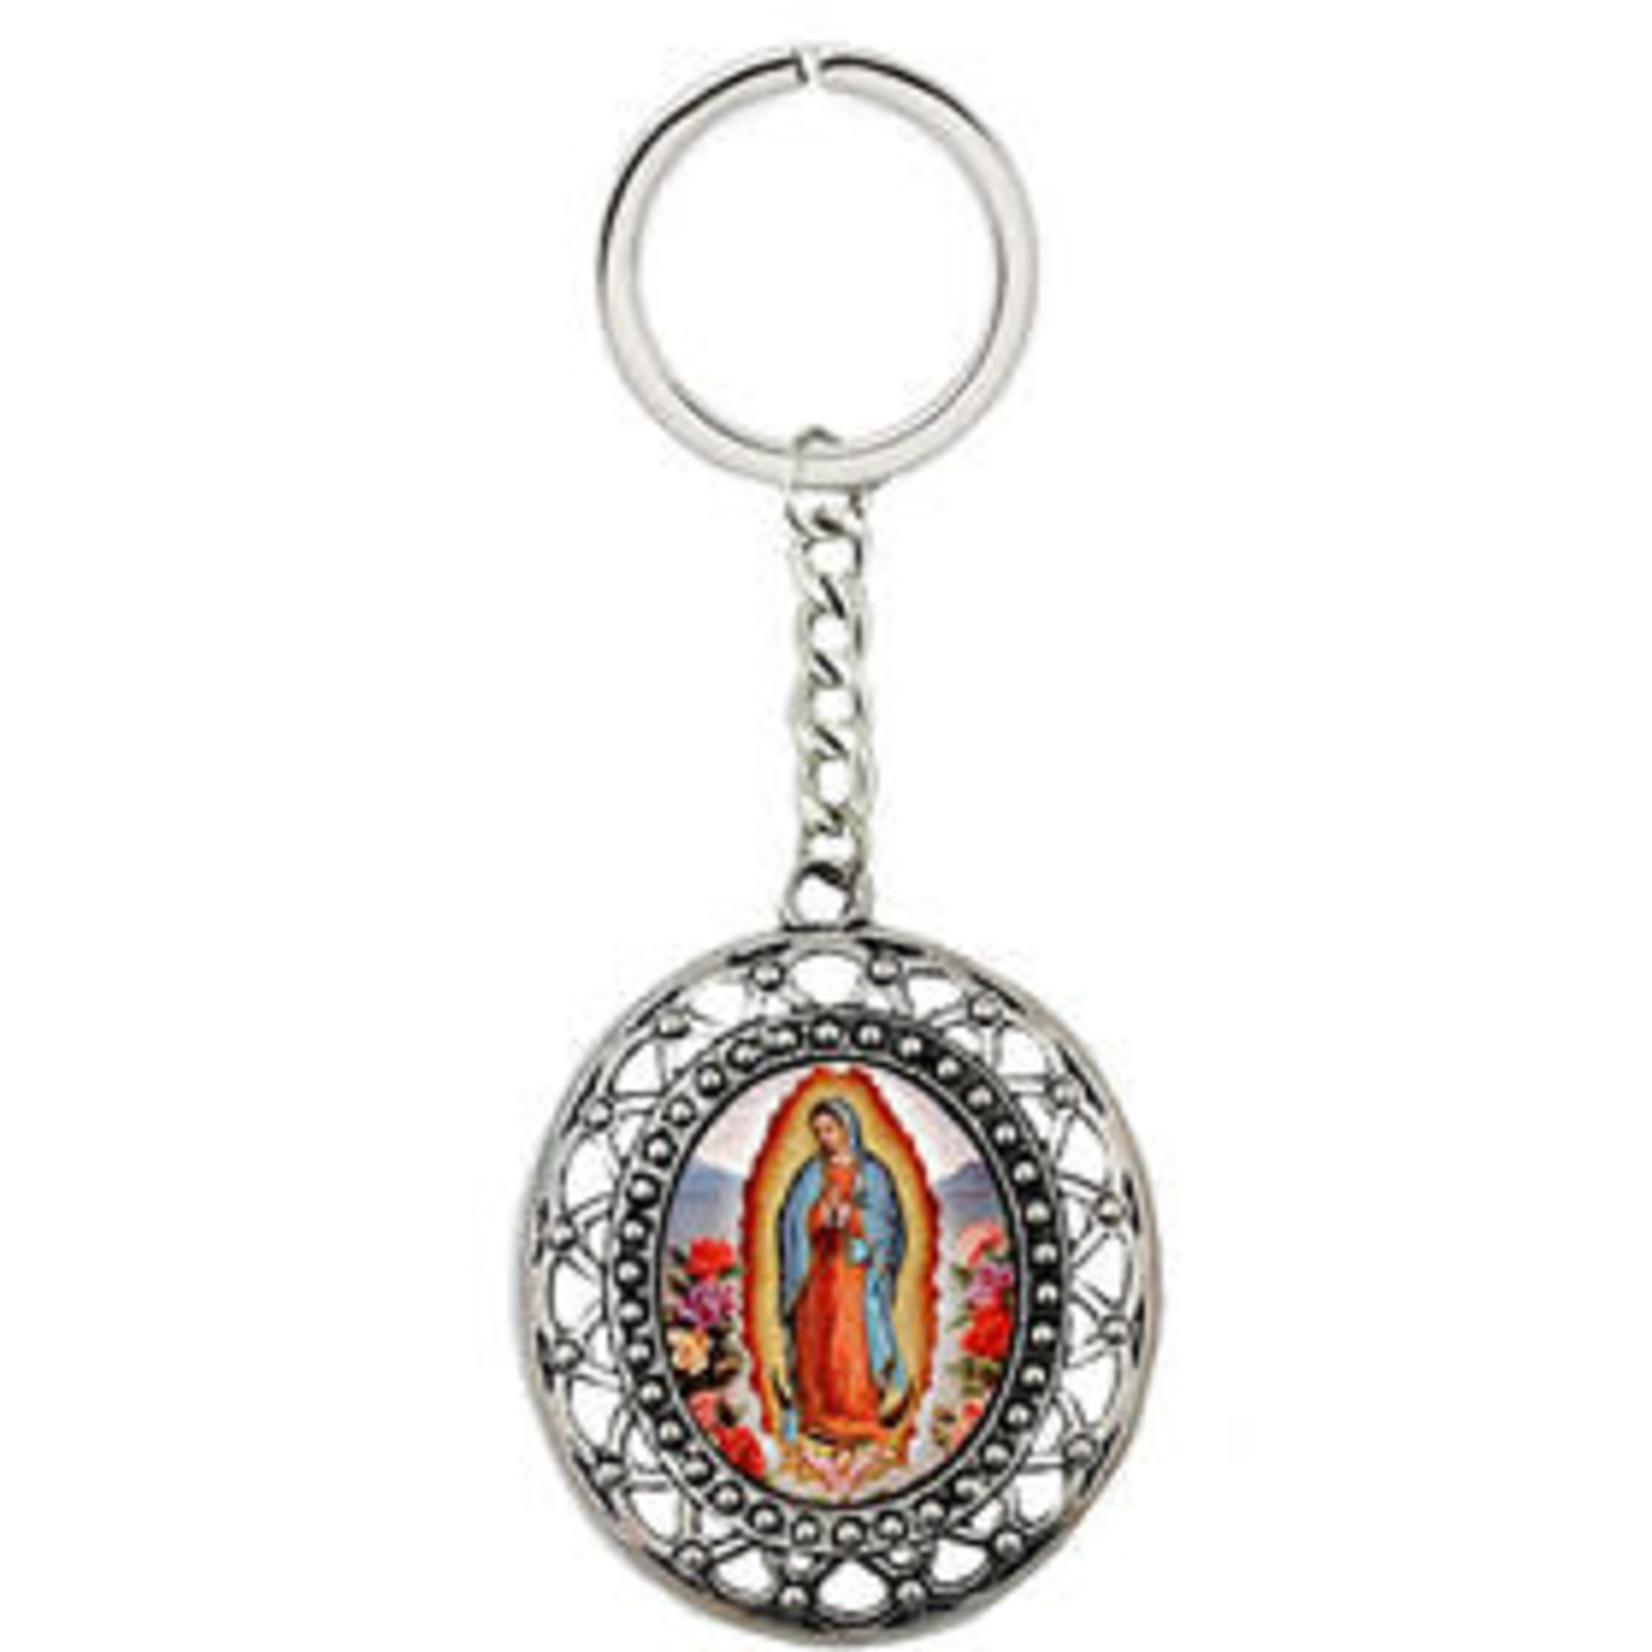 Our Lady of Guadalupe Metal Keychain